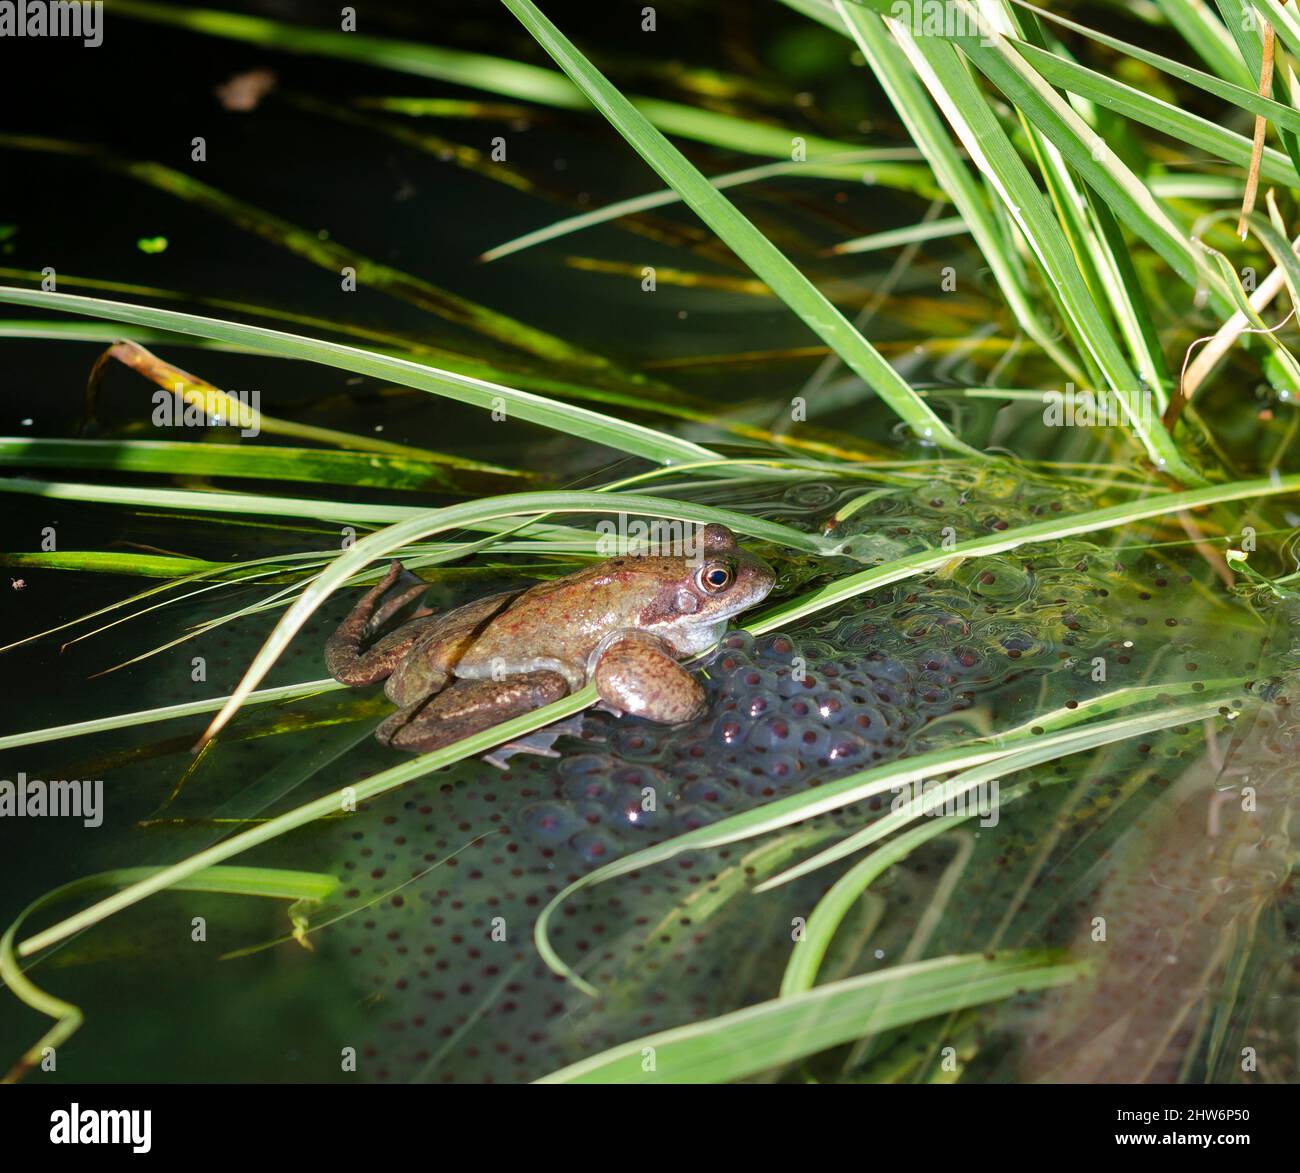 frog in pond spawning Stock Photo